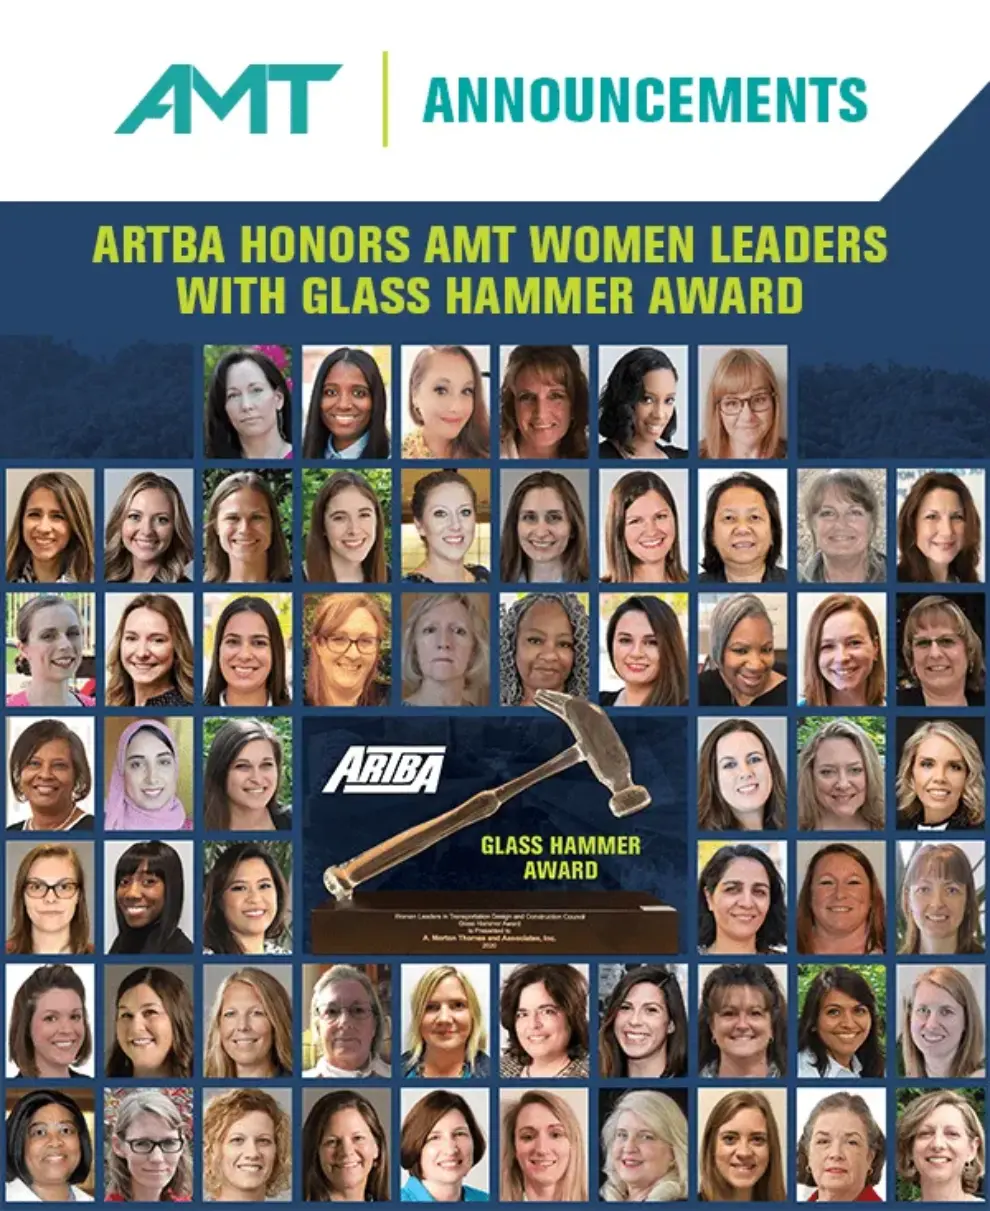 ARTBA Honors AMT Women Leaders with Glass Hammer Award